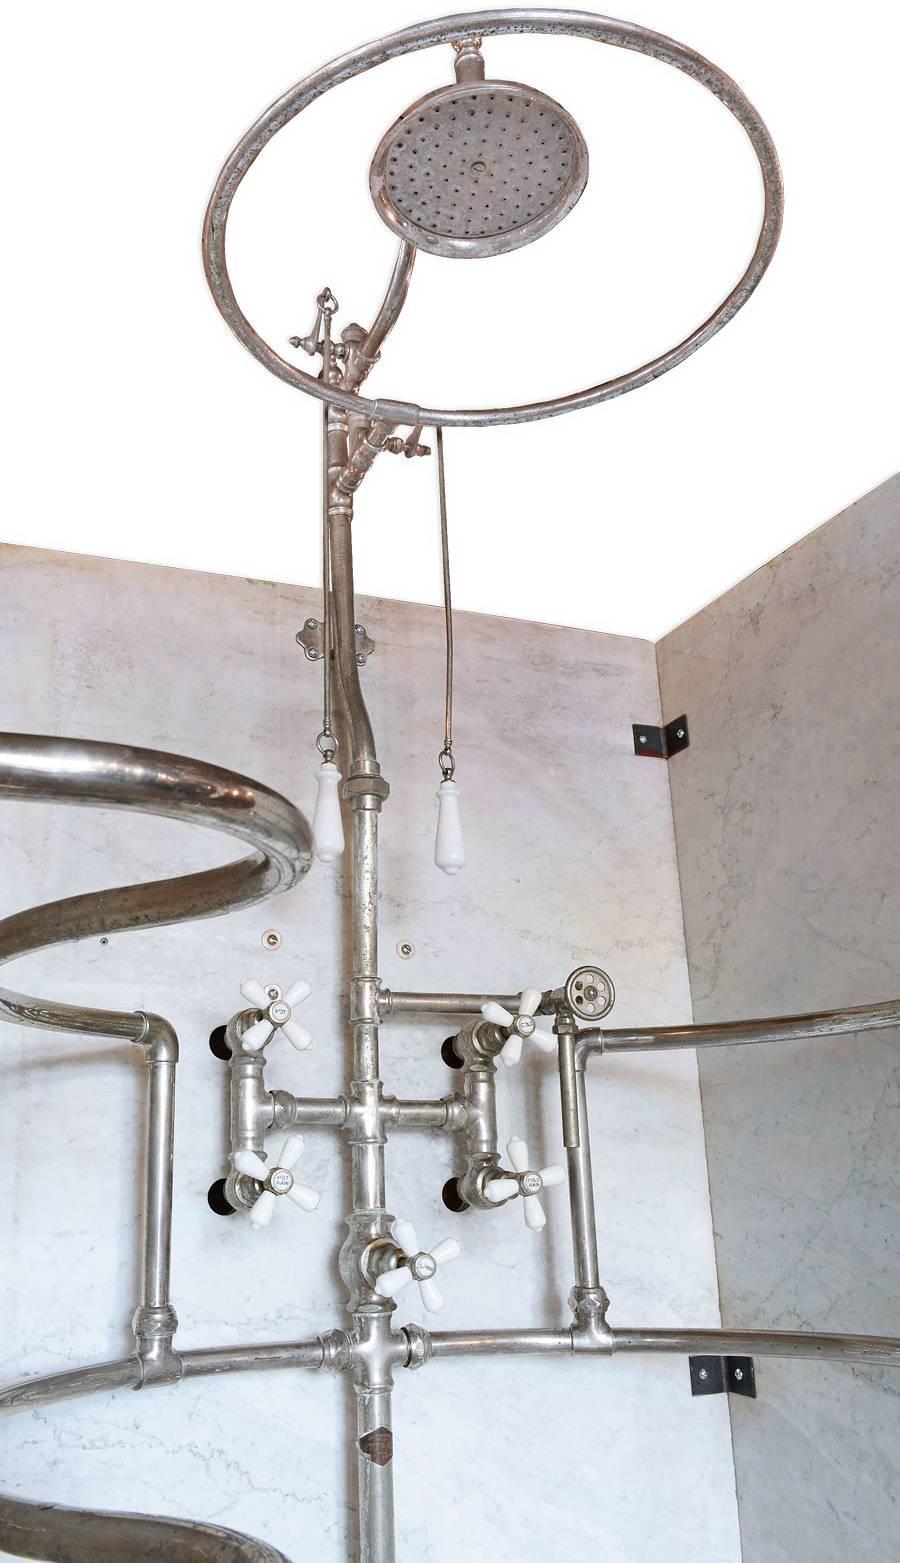 This original Rib Cage Shower Unit is a rare find.  A ‘ribcage’ were generally only found in very upscale homes.    This unit is completely enclosed in Carrara marble, and is designed with multiple sprays to apply jets of water to specific parts of